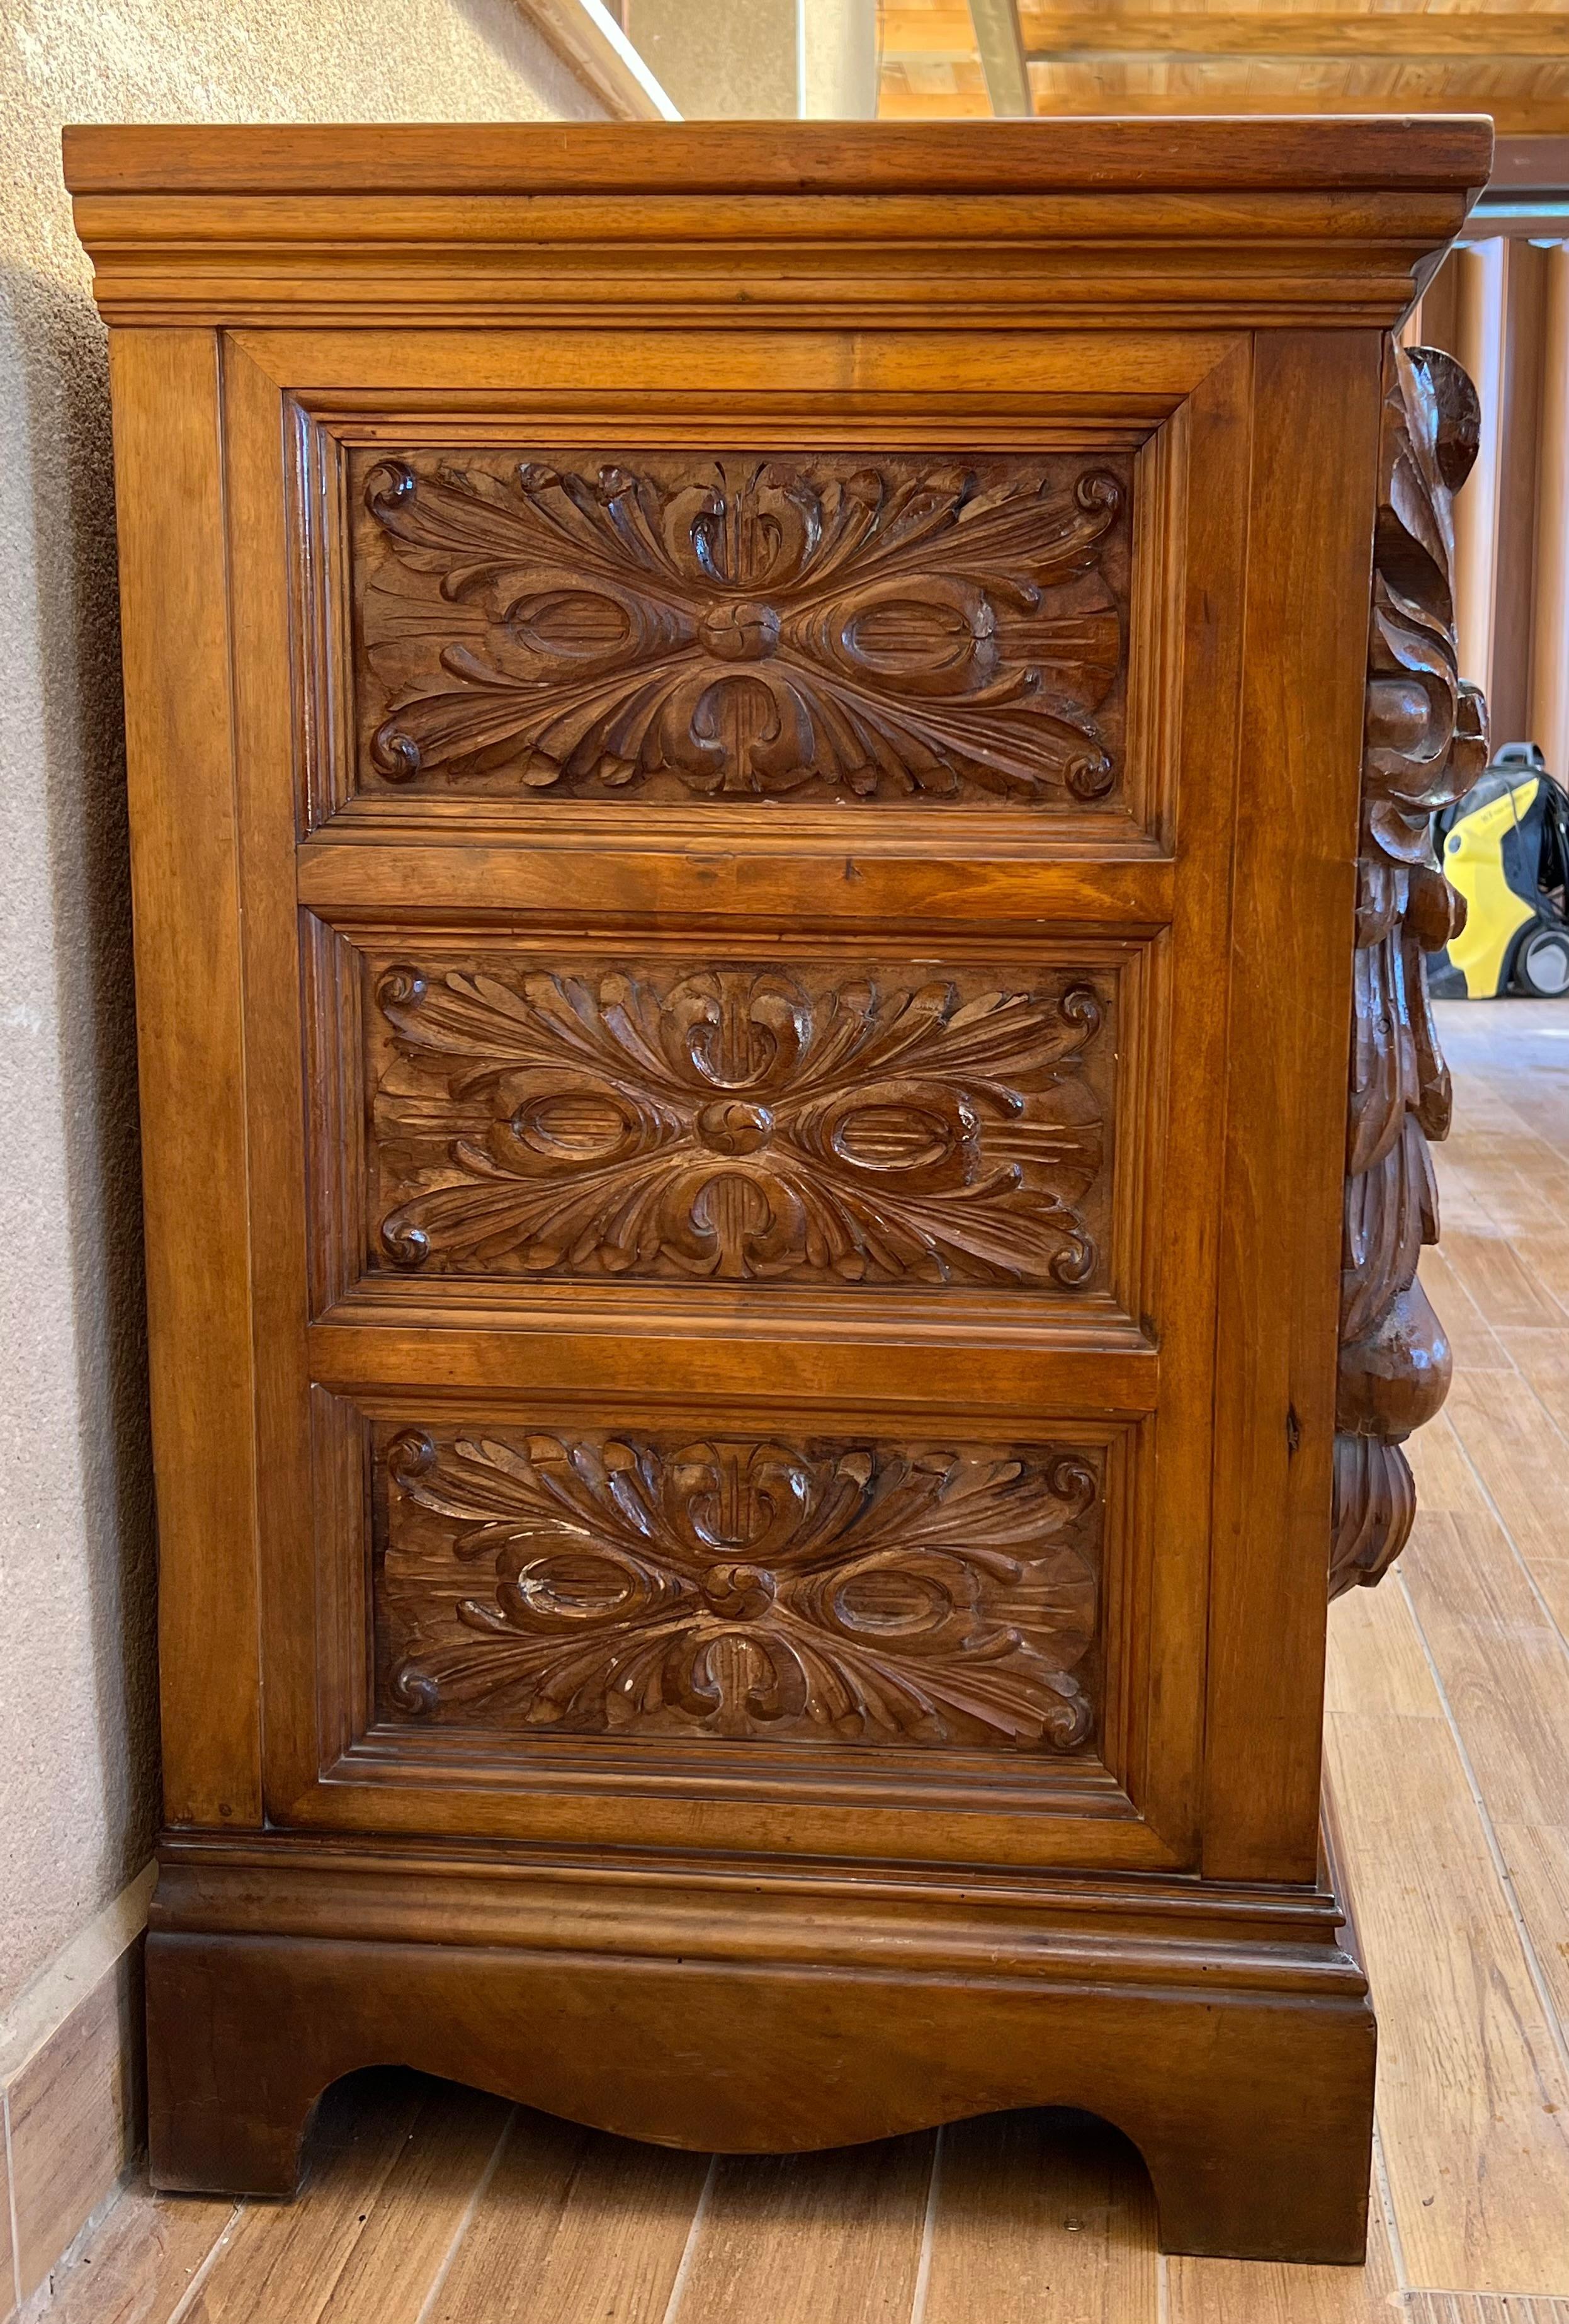 Antique Spanish Carved Walnut Sideboard with Florals Reliefs, circa 1870-1880 For Sale 5